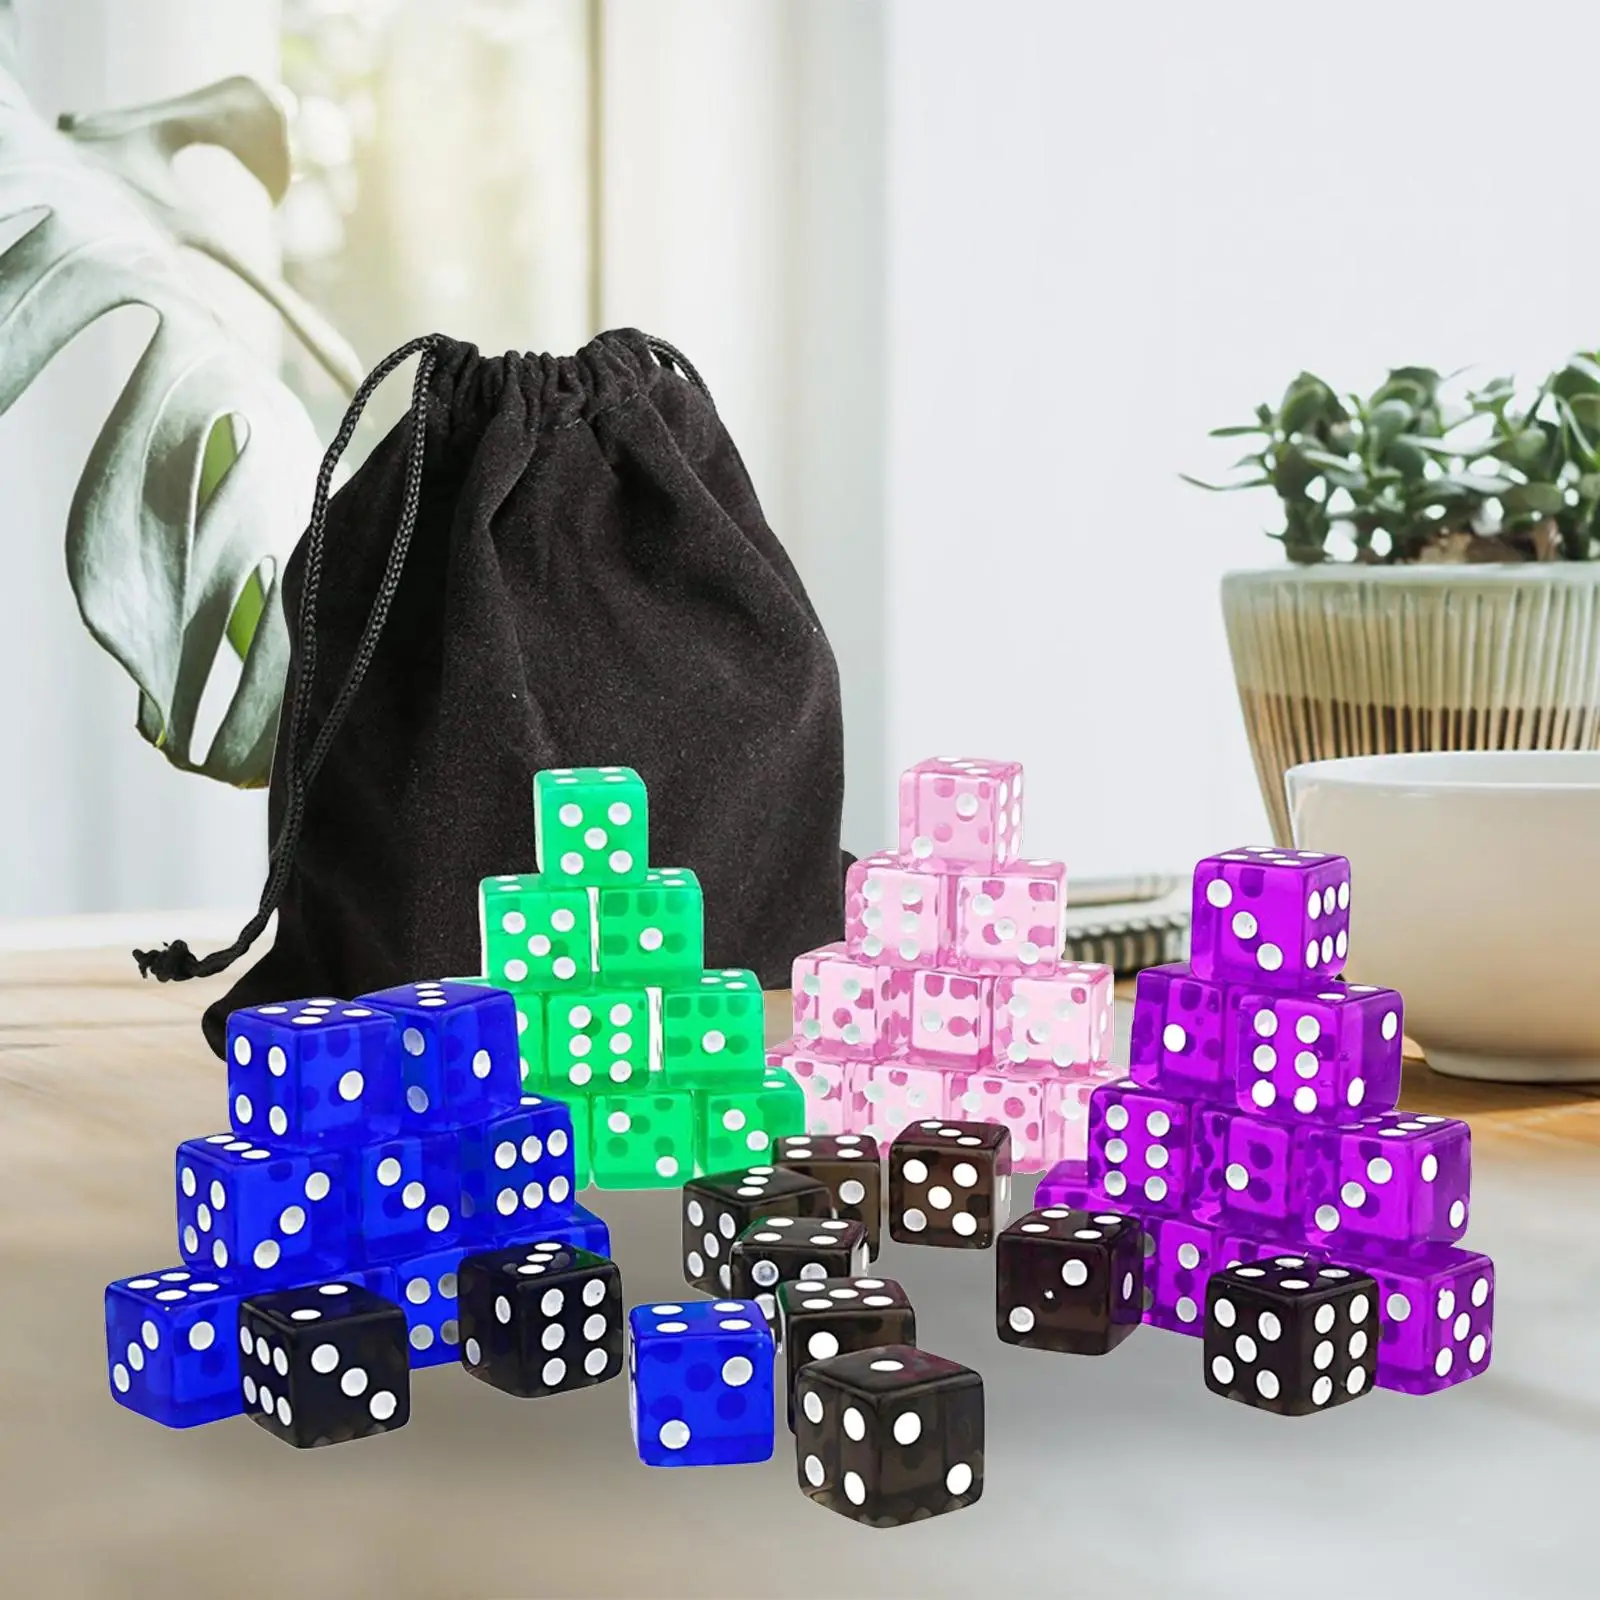 50Pcs 6 Sided Dices Set, Party Game Dices, Math Counting Teaching Aids, Party Favors